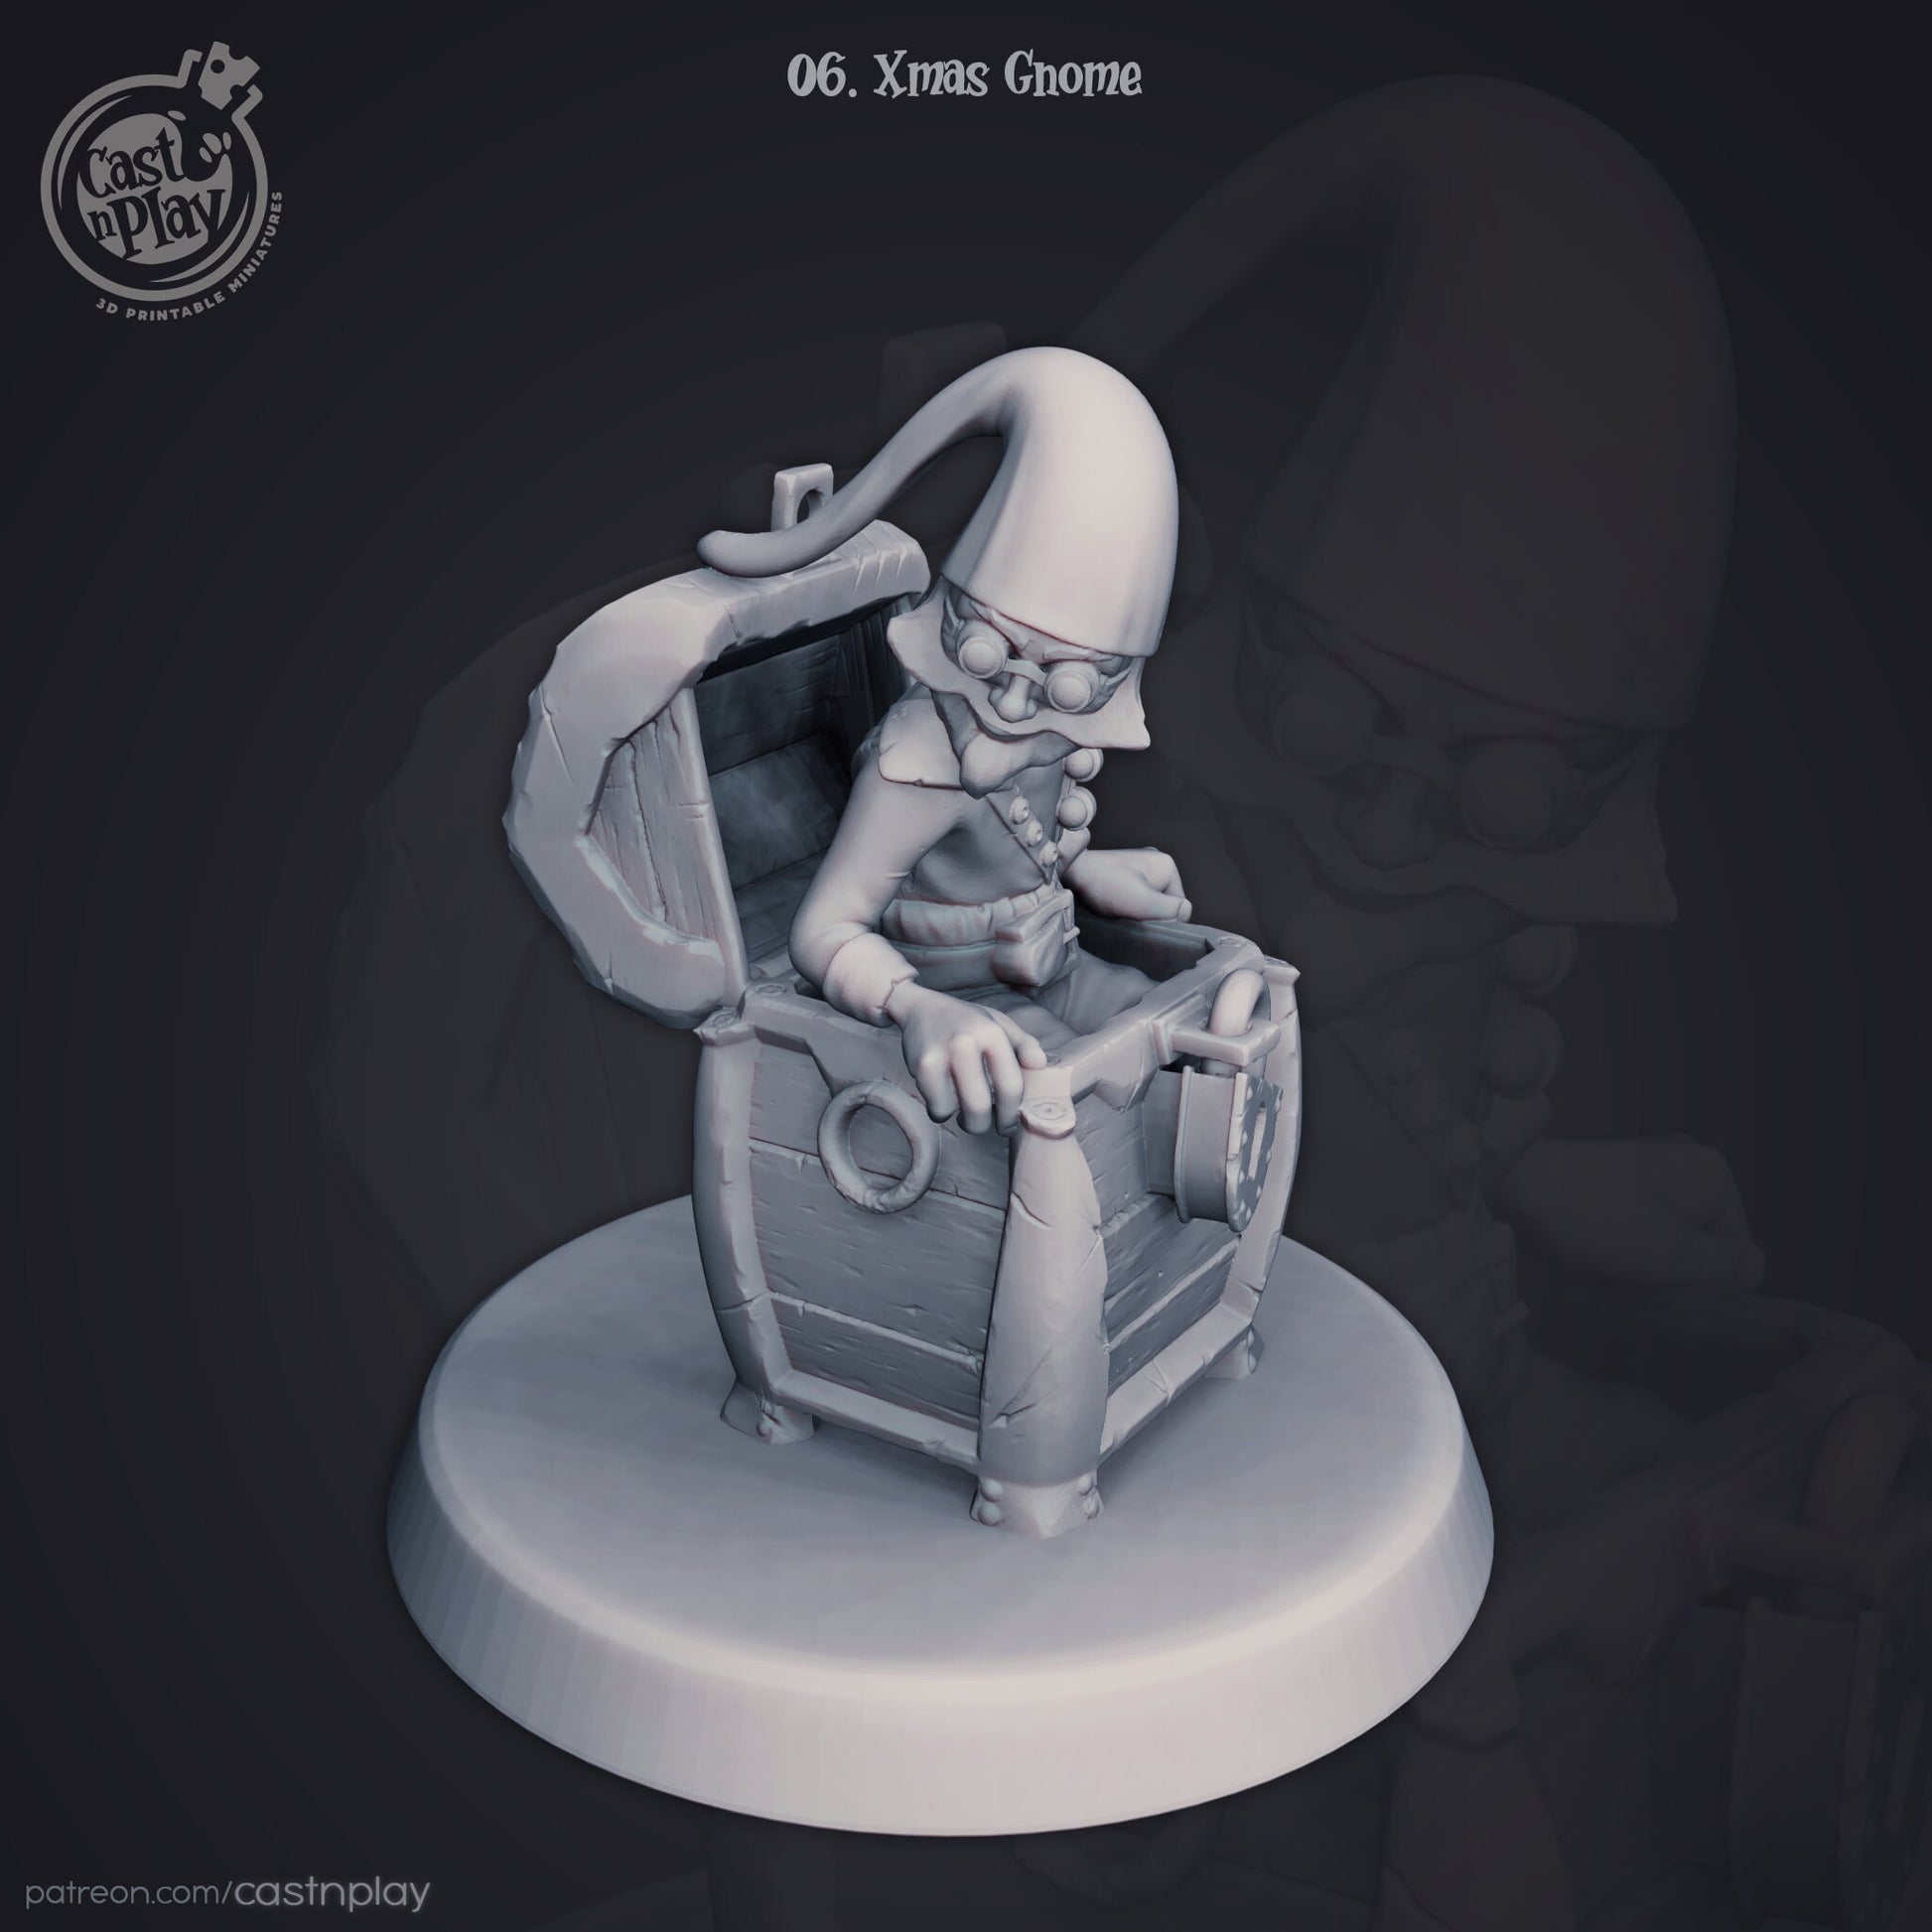 Christmas Gnome - Cast n Play Printed Miniature Figurine | Dungeons & Dragons | Pathfinder | Tabletop